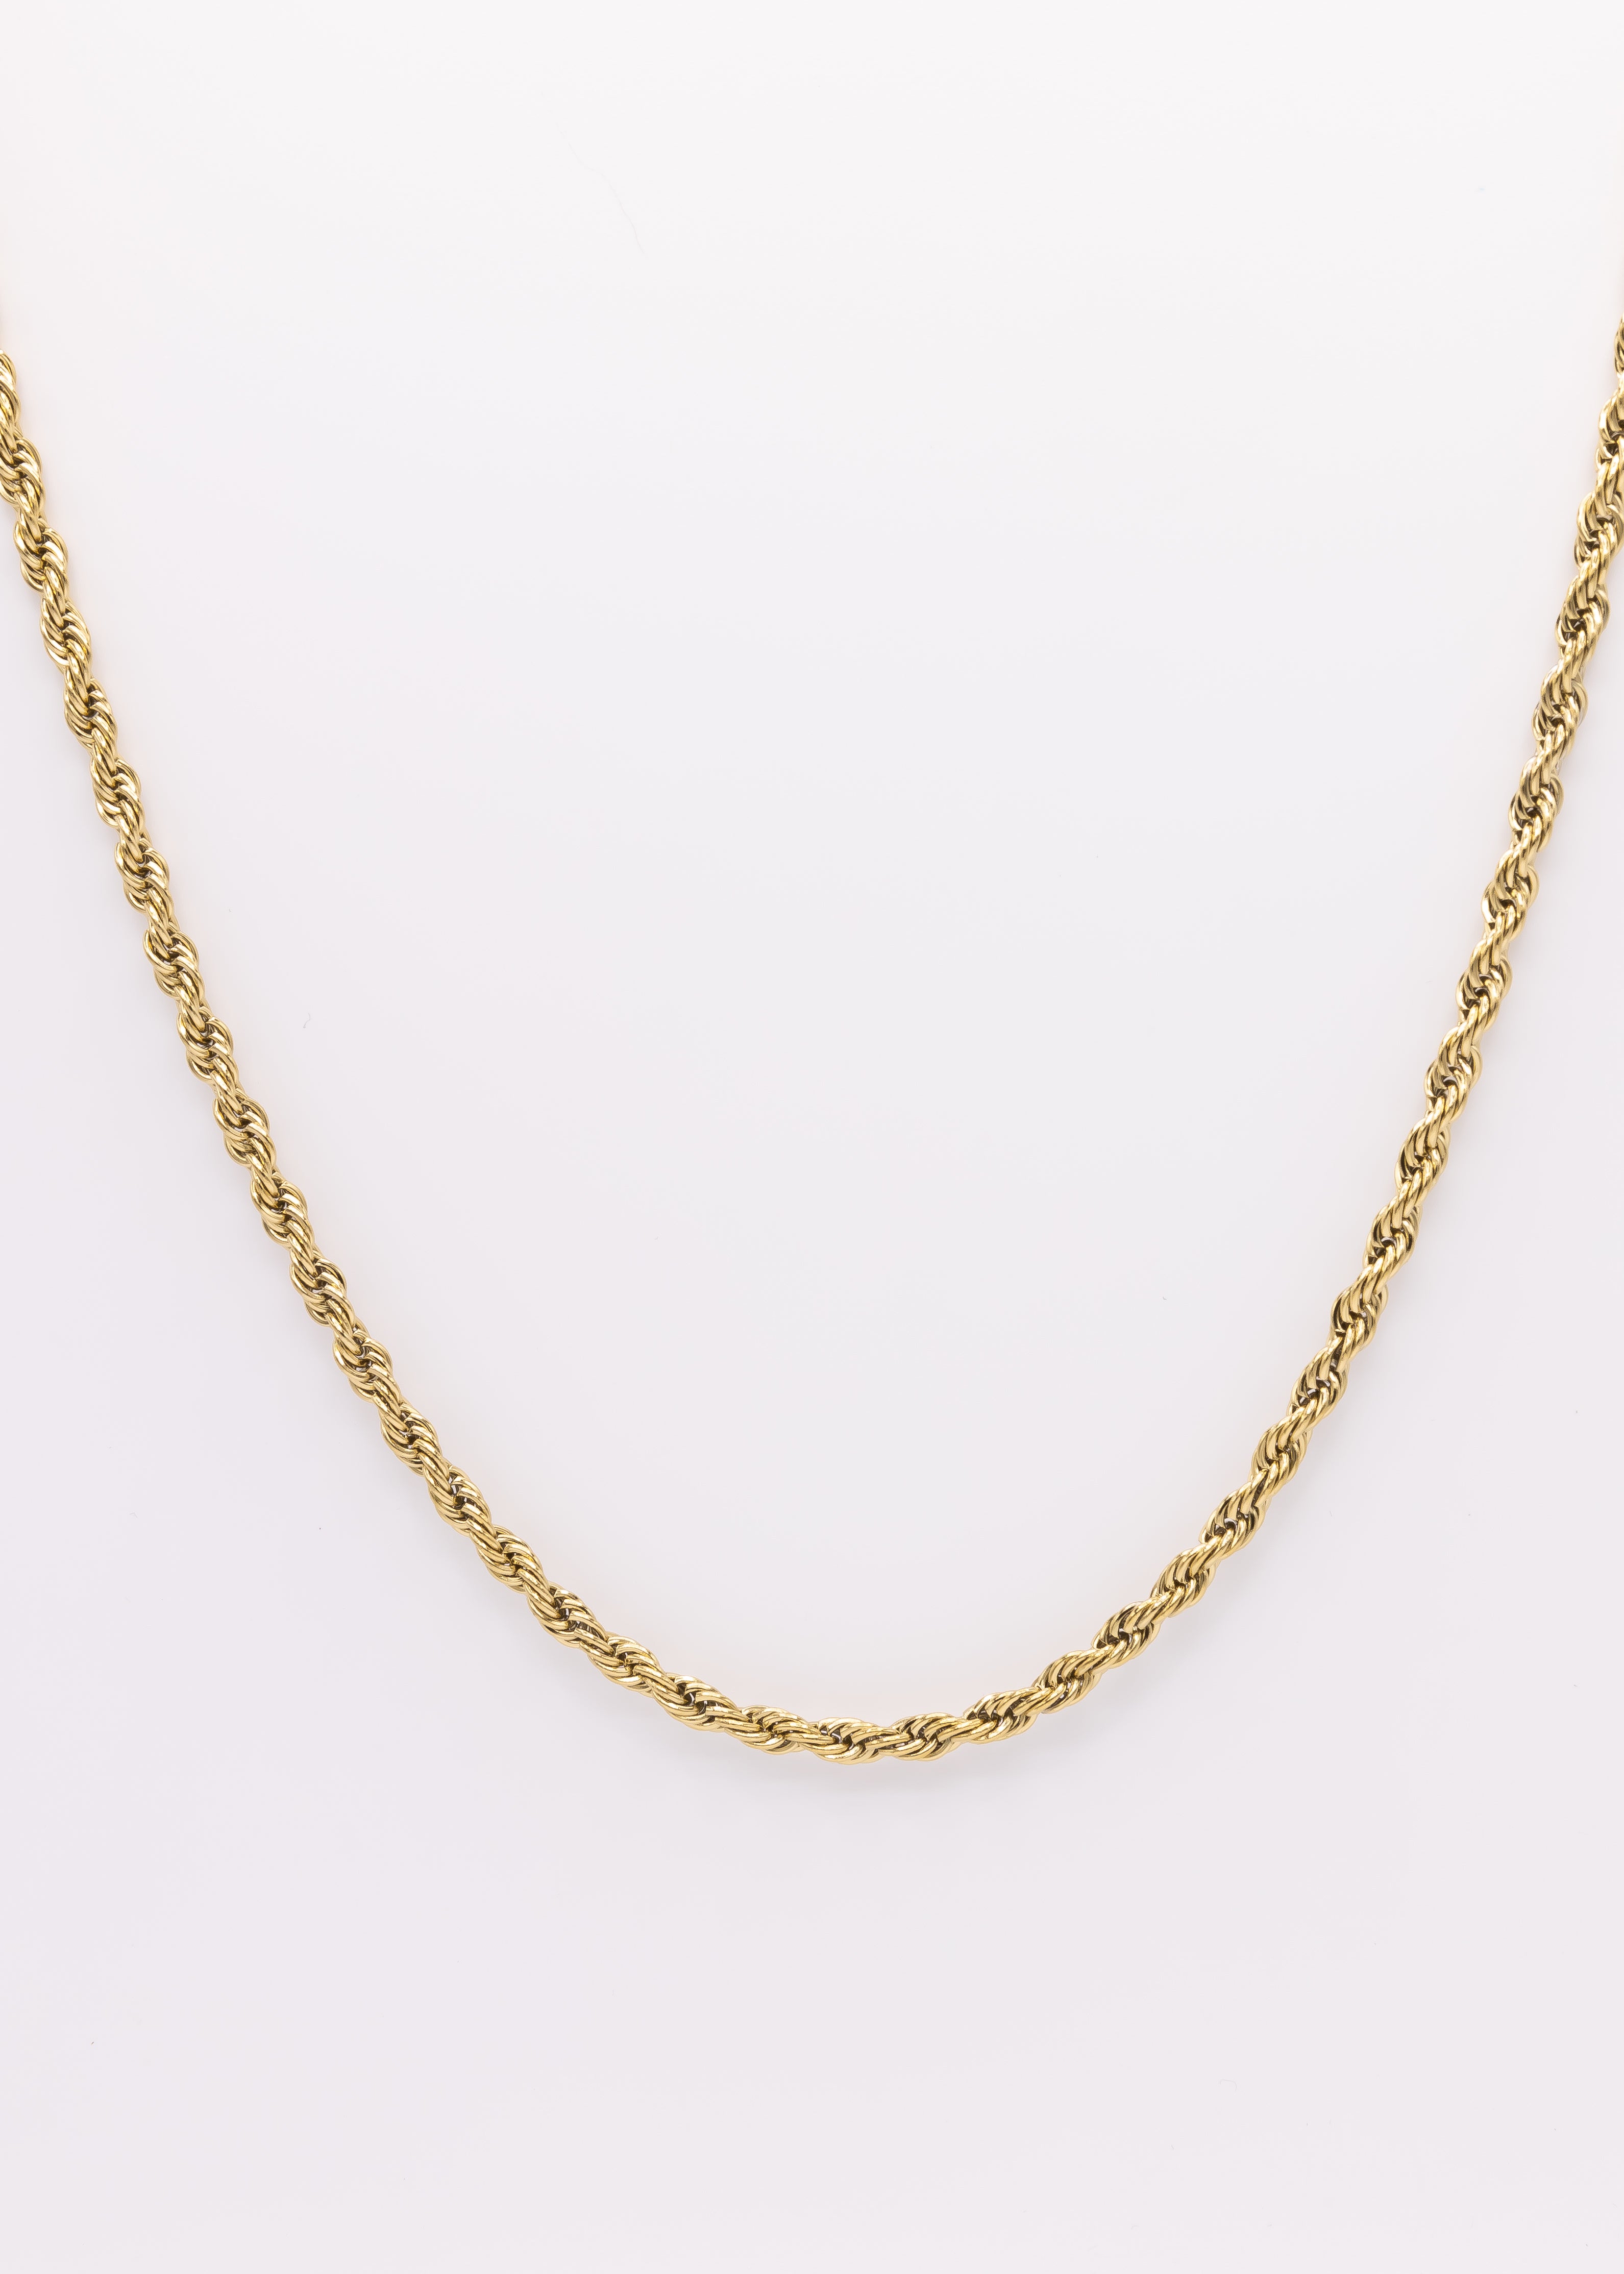 Gold Rope Chain Necklace (14K Gold Plated Stainless Steel)